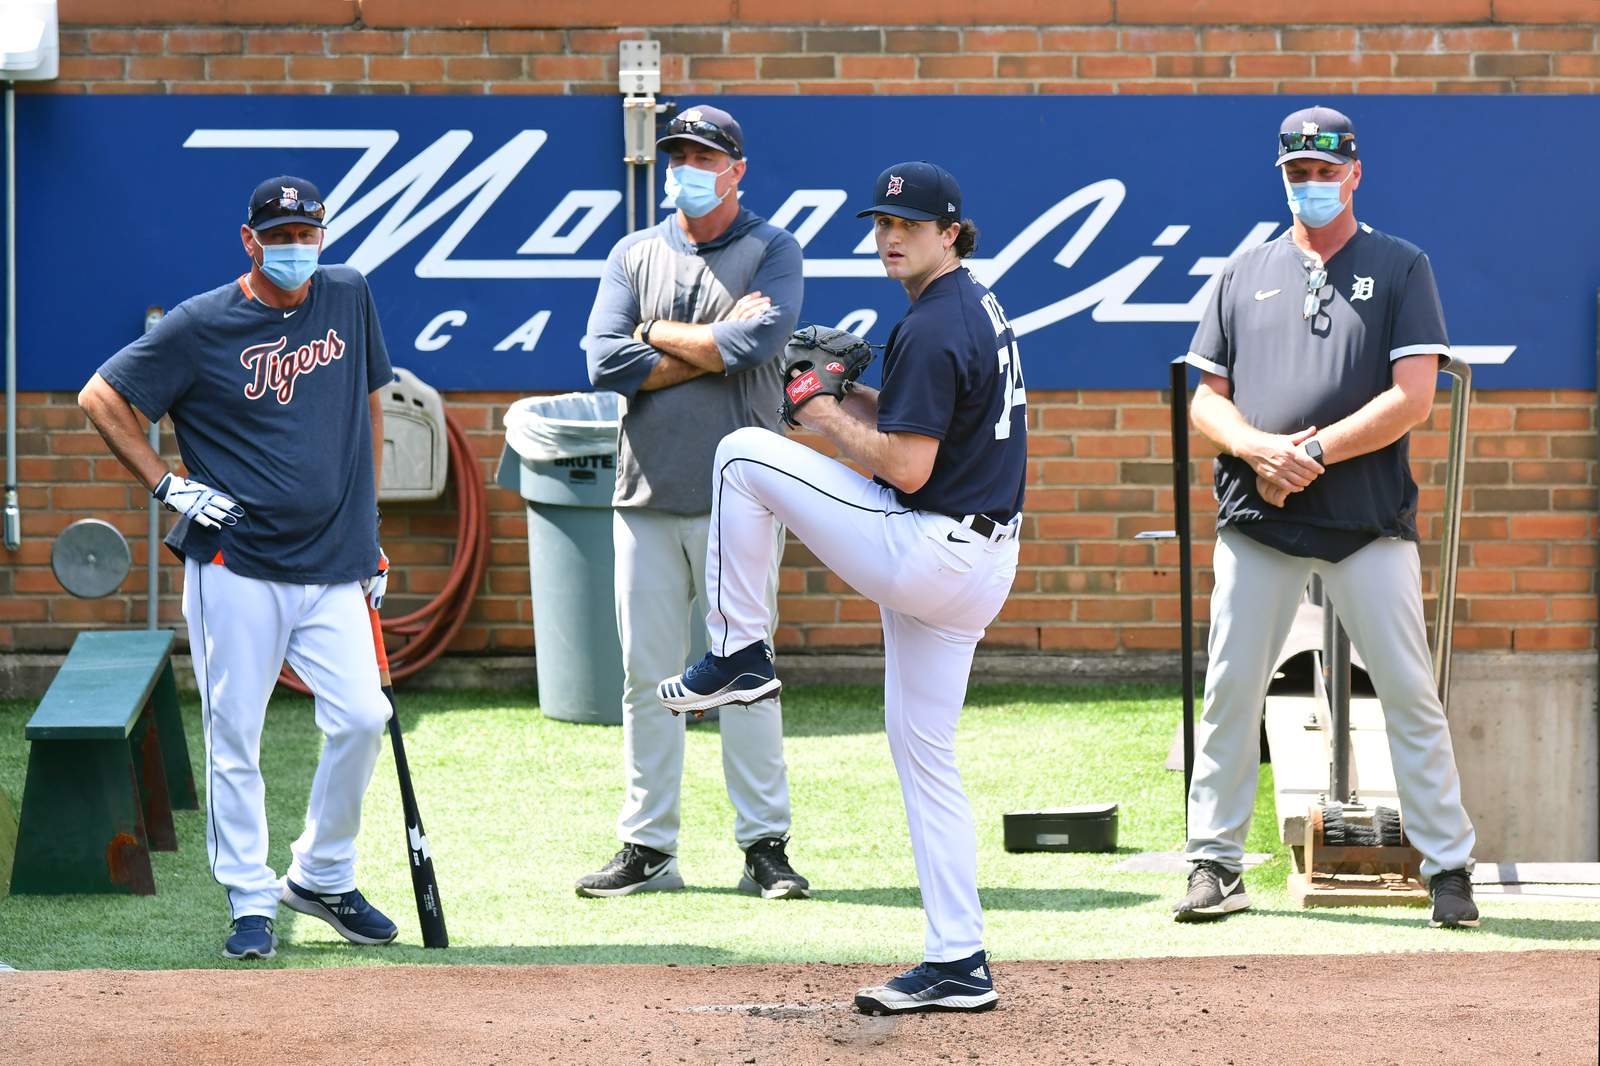 Detroit Tigers’ pitchers and catchers report to spring training today